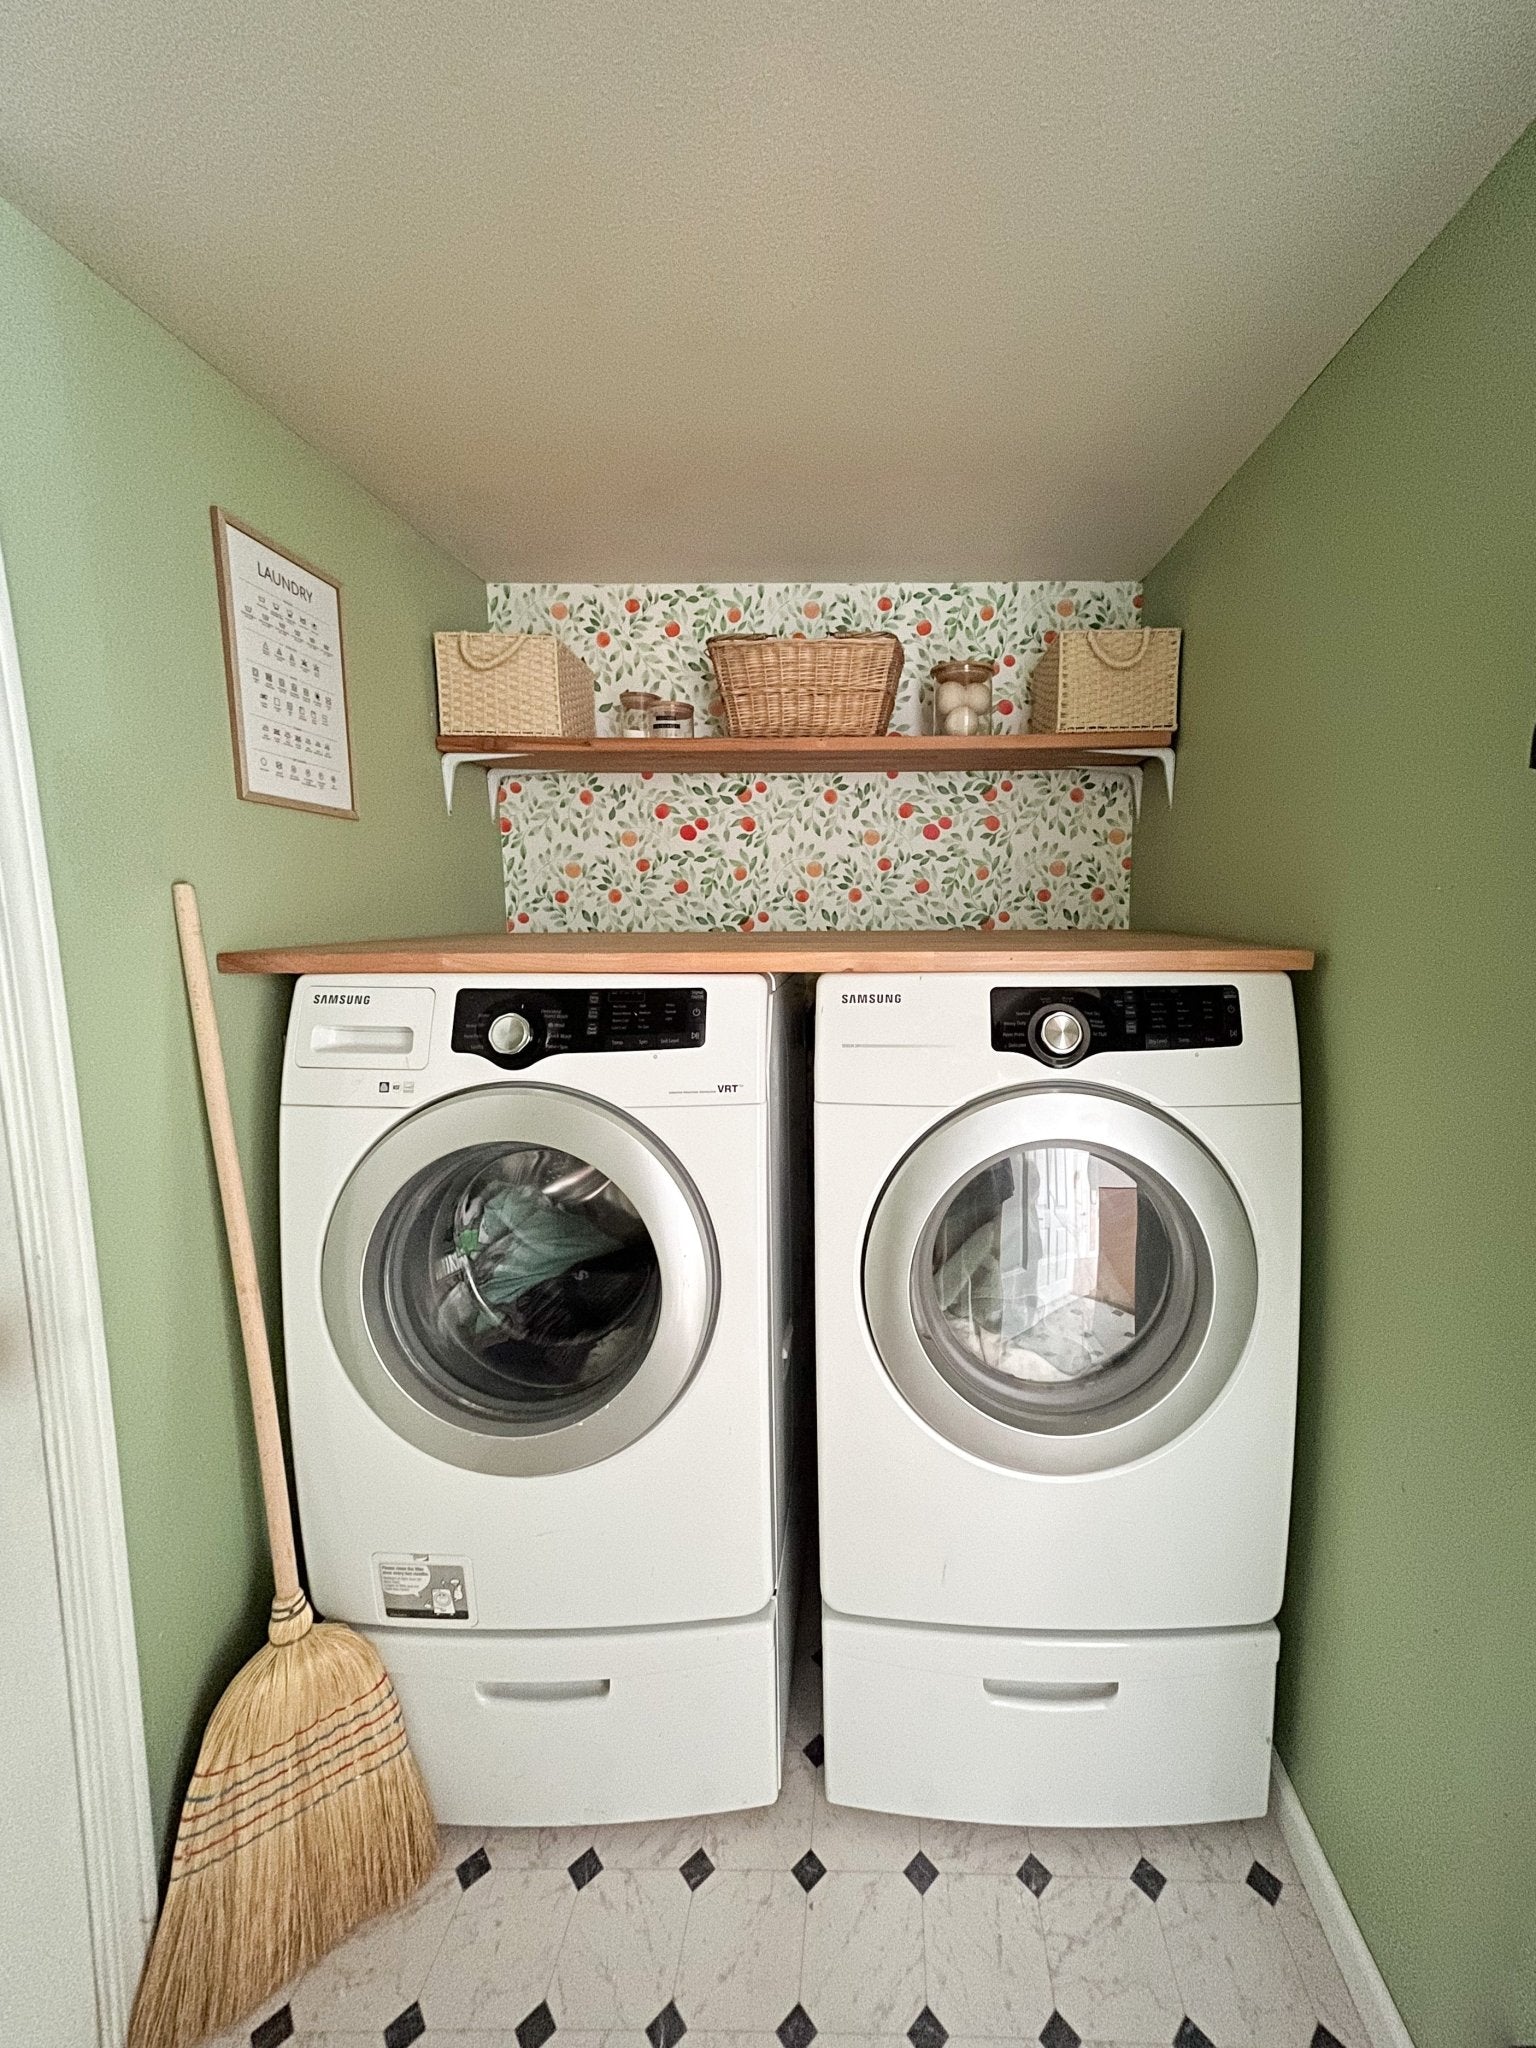 Makeover in Laundry Room using peel and stick oranges wallpaper